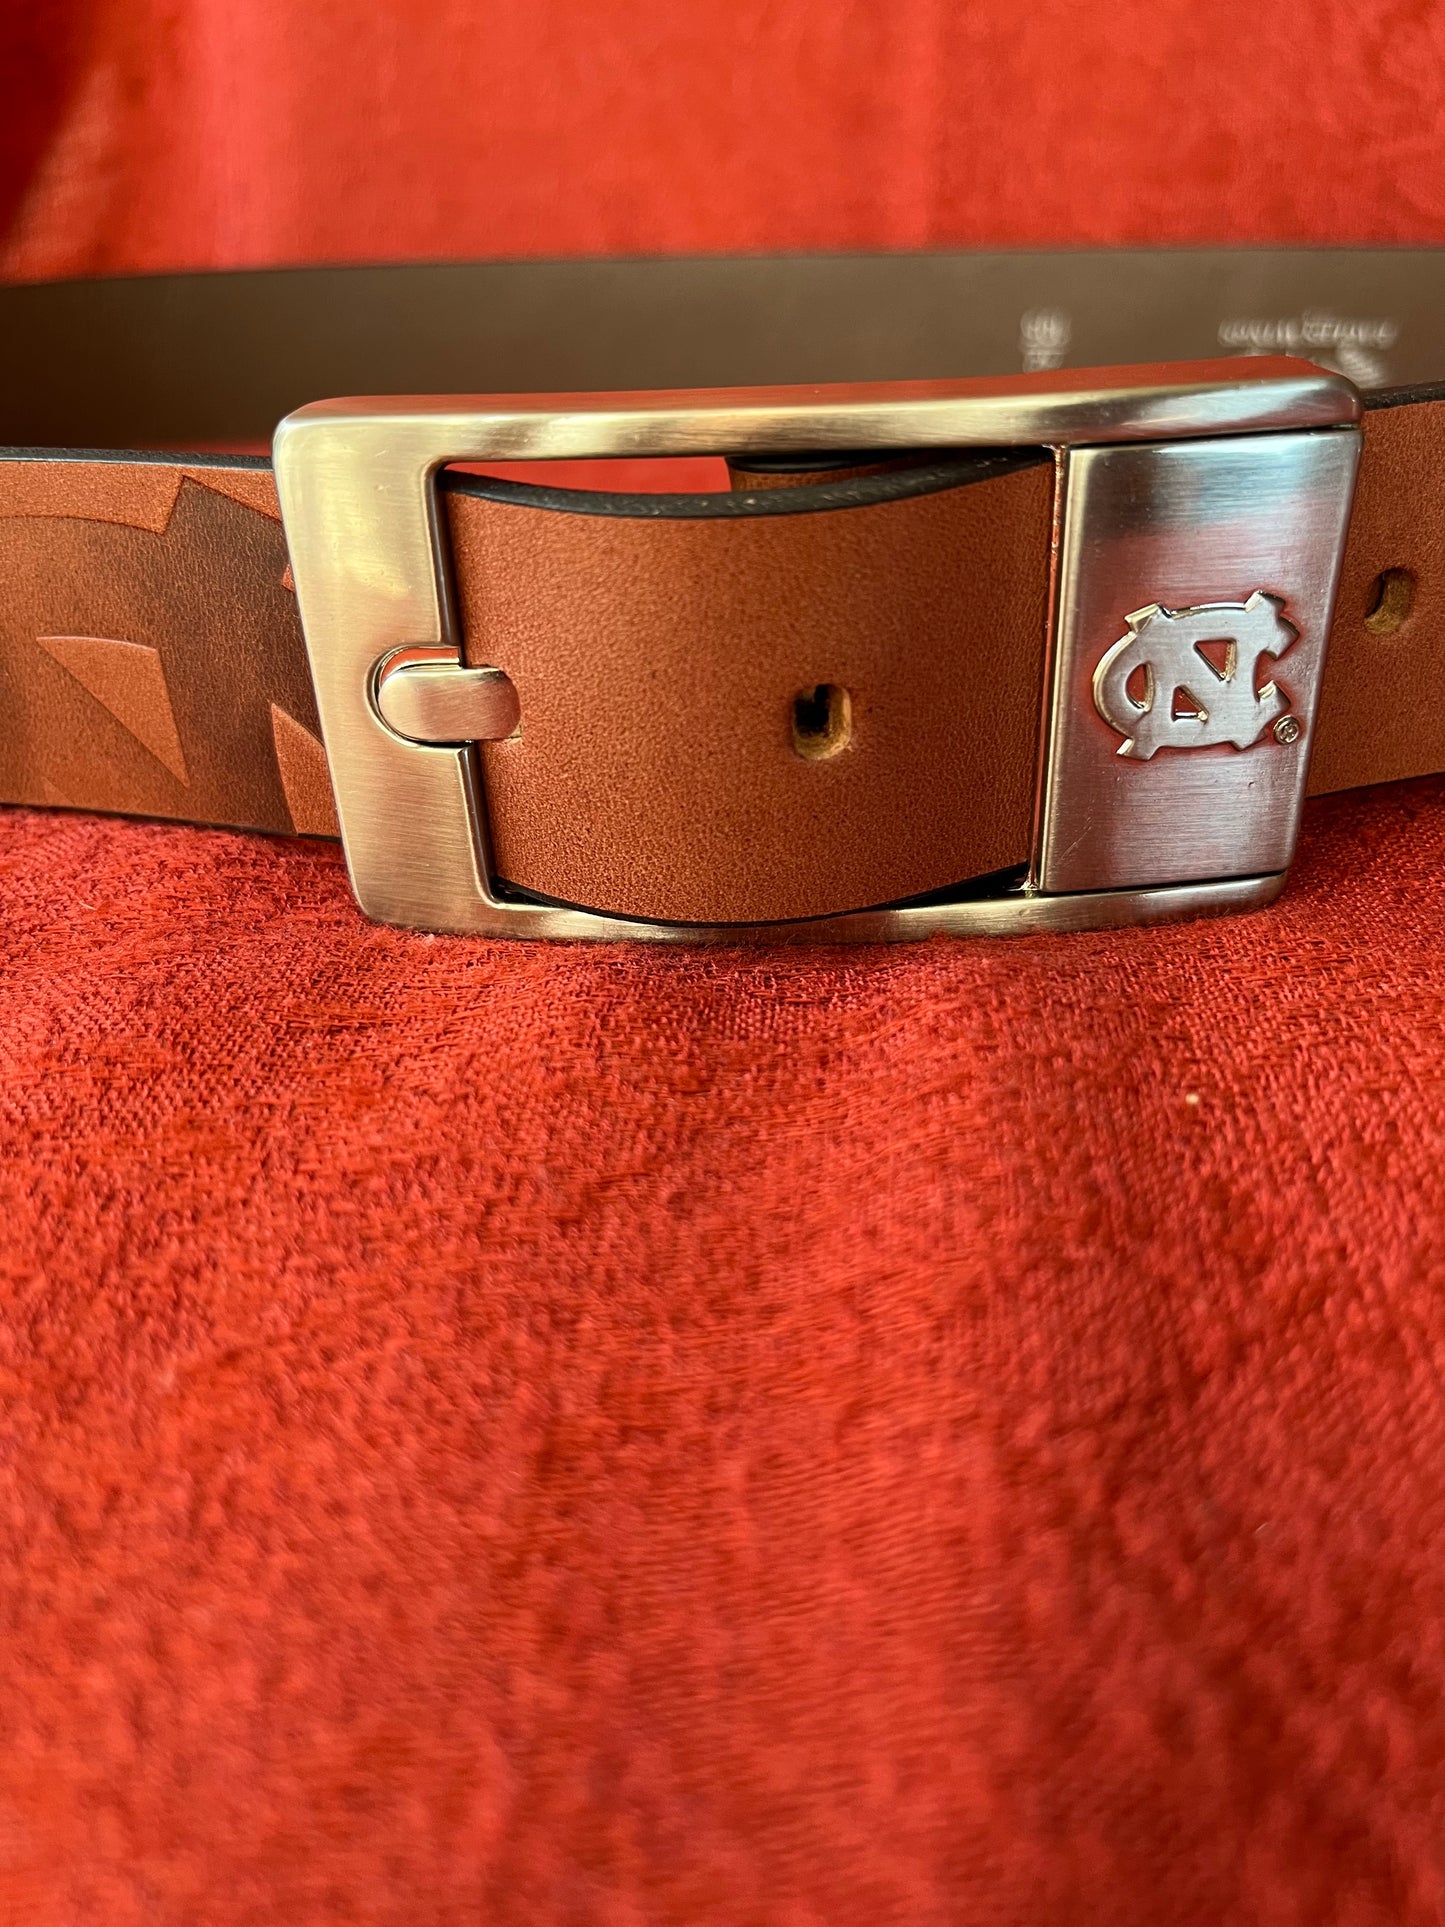 Eagles Wings Leather UNC Leather Belt